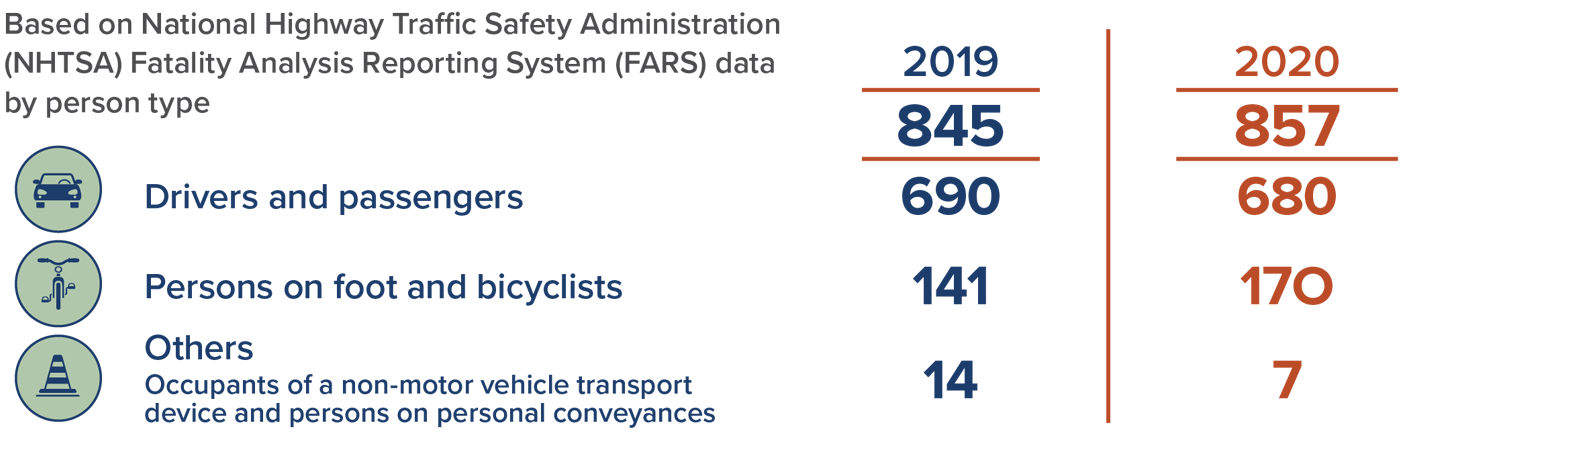 Total work zone fatalities by person type in 2019 are 845 and in 2020 are 857.